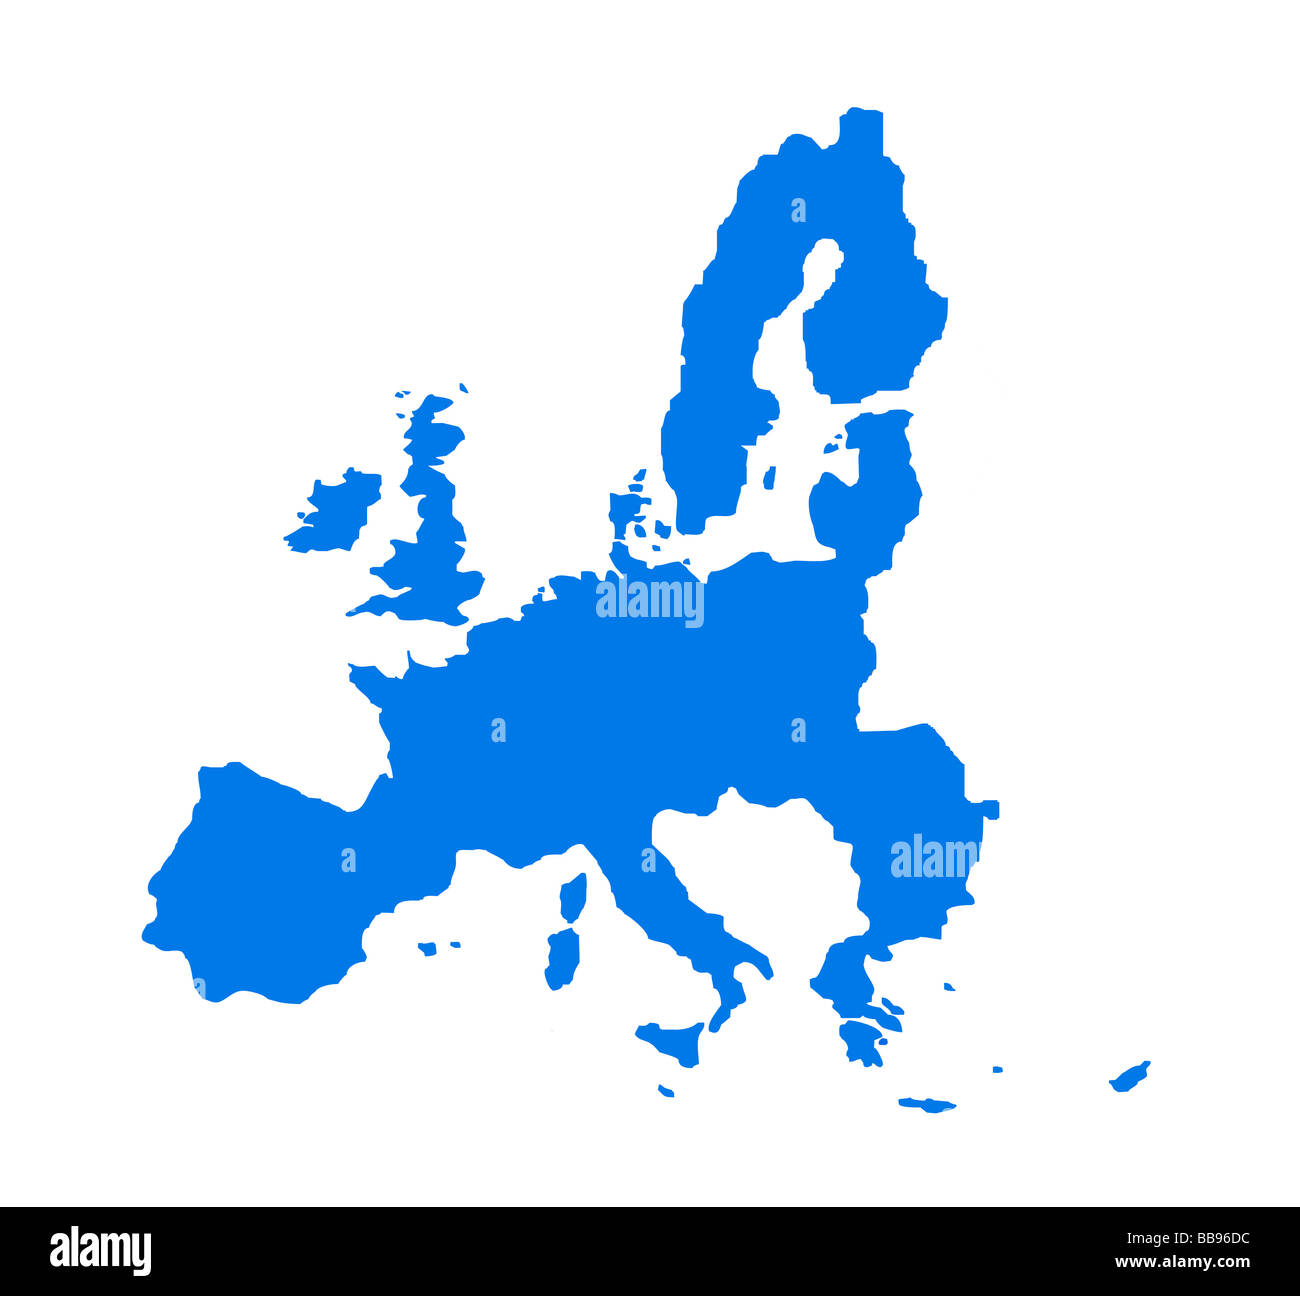 Outline map of countries of European Economic Union in blue isolated on white background Stock Photo